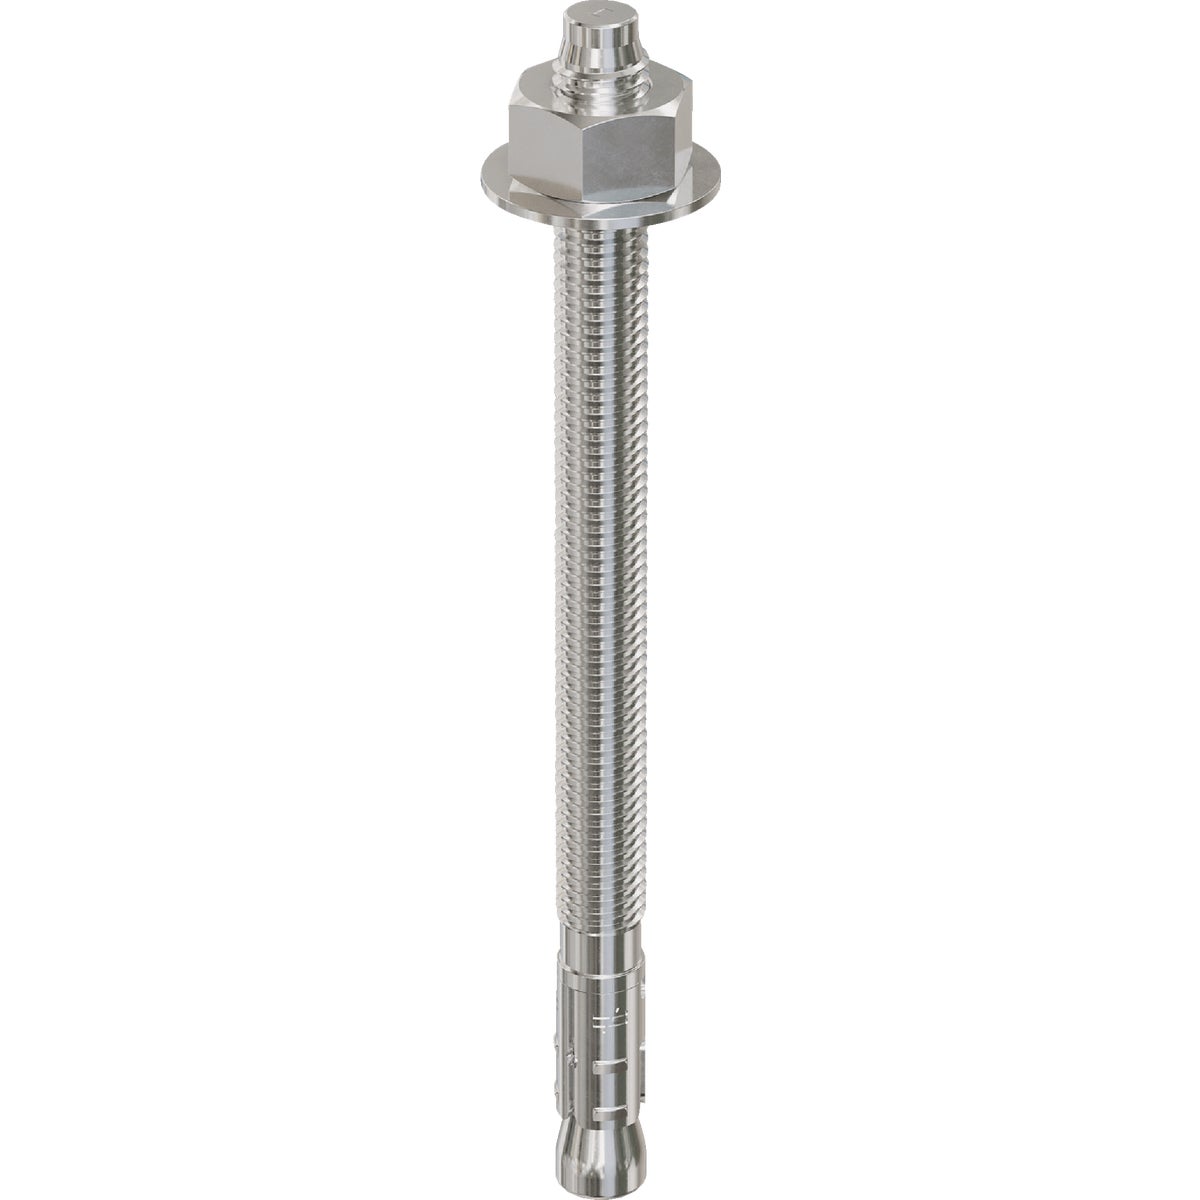 Simpson Strong-Tie Strong-Bolt 2 1/2 In. x 7 In. Wedge Anchor (25-Qty) 